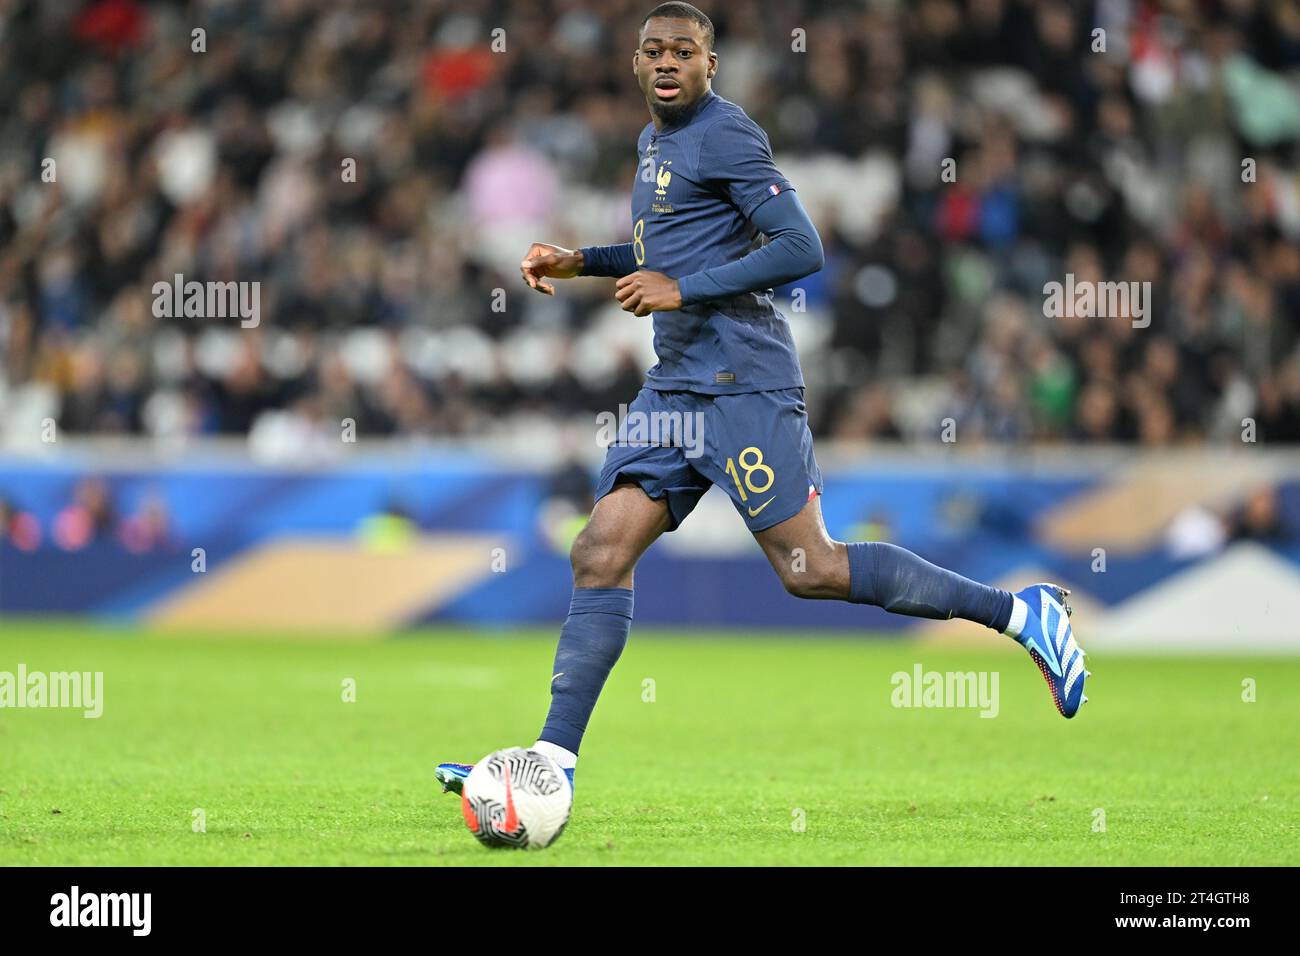 Youssouf Fofana (18) of France pictured during a soccer game between the national teams of France and Scotland in friendly game, on October 17 , 2023 in Lille, France. (Photo by David Catry / Sportpix) Stock Photo